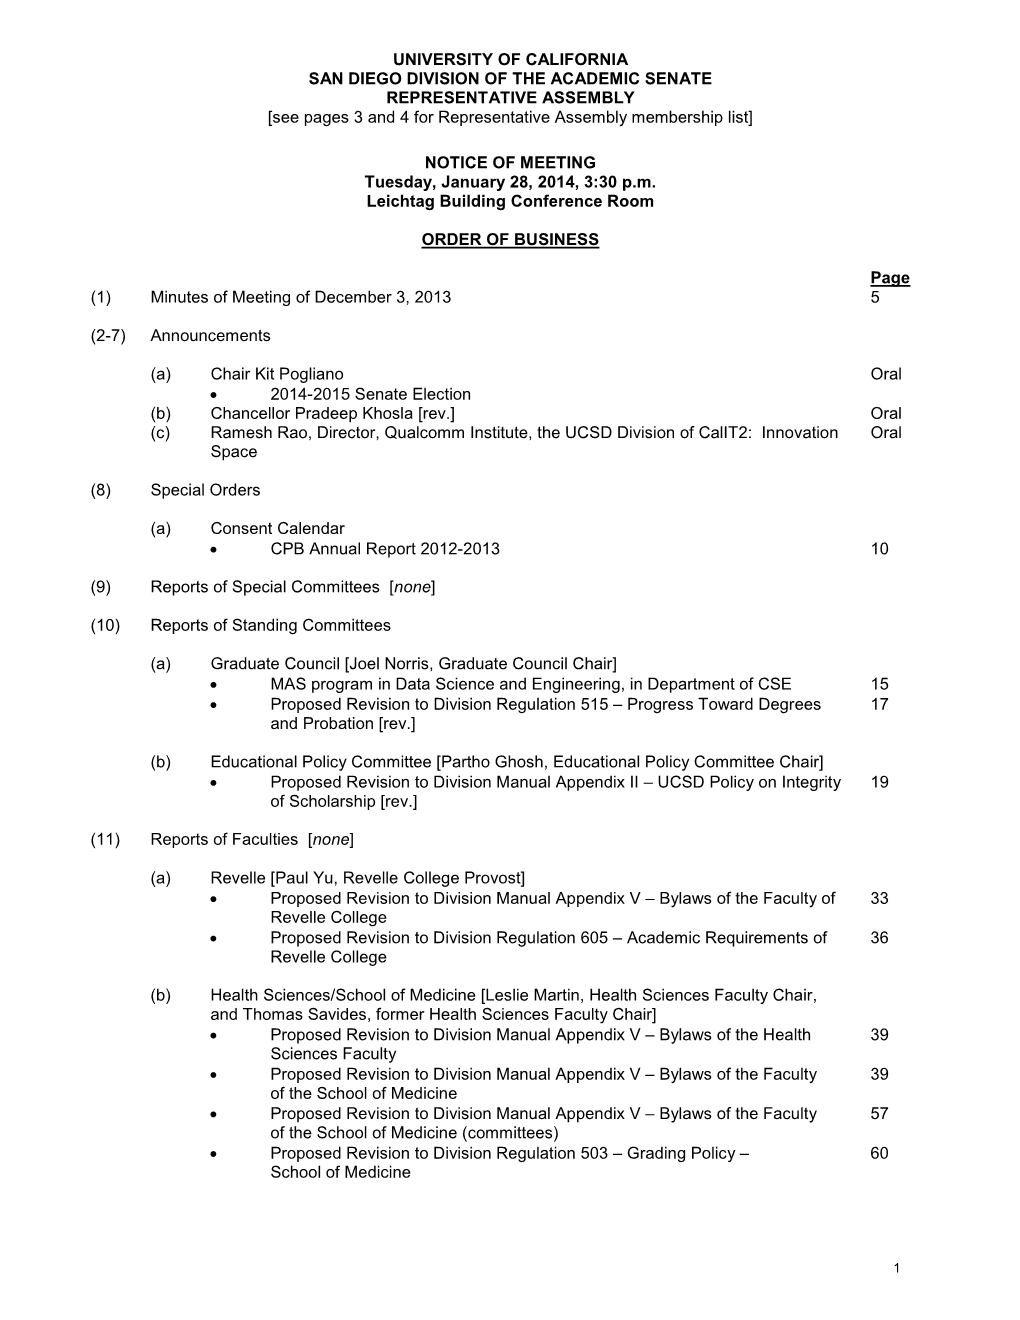 UNIVERSITY of CALIFORNIA SAN DIEGO DIVISION of the ACADEMIC SENATE REPRESENTATIVE ASSEMBLY [See Pages 3 and 4 for Representative Assembly Membership List]